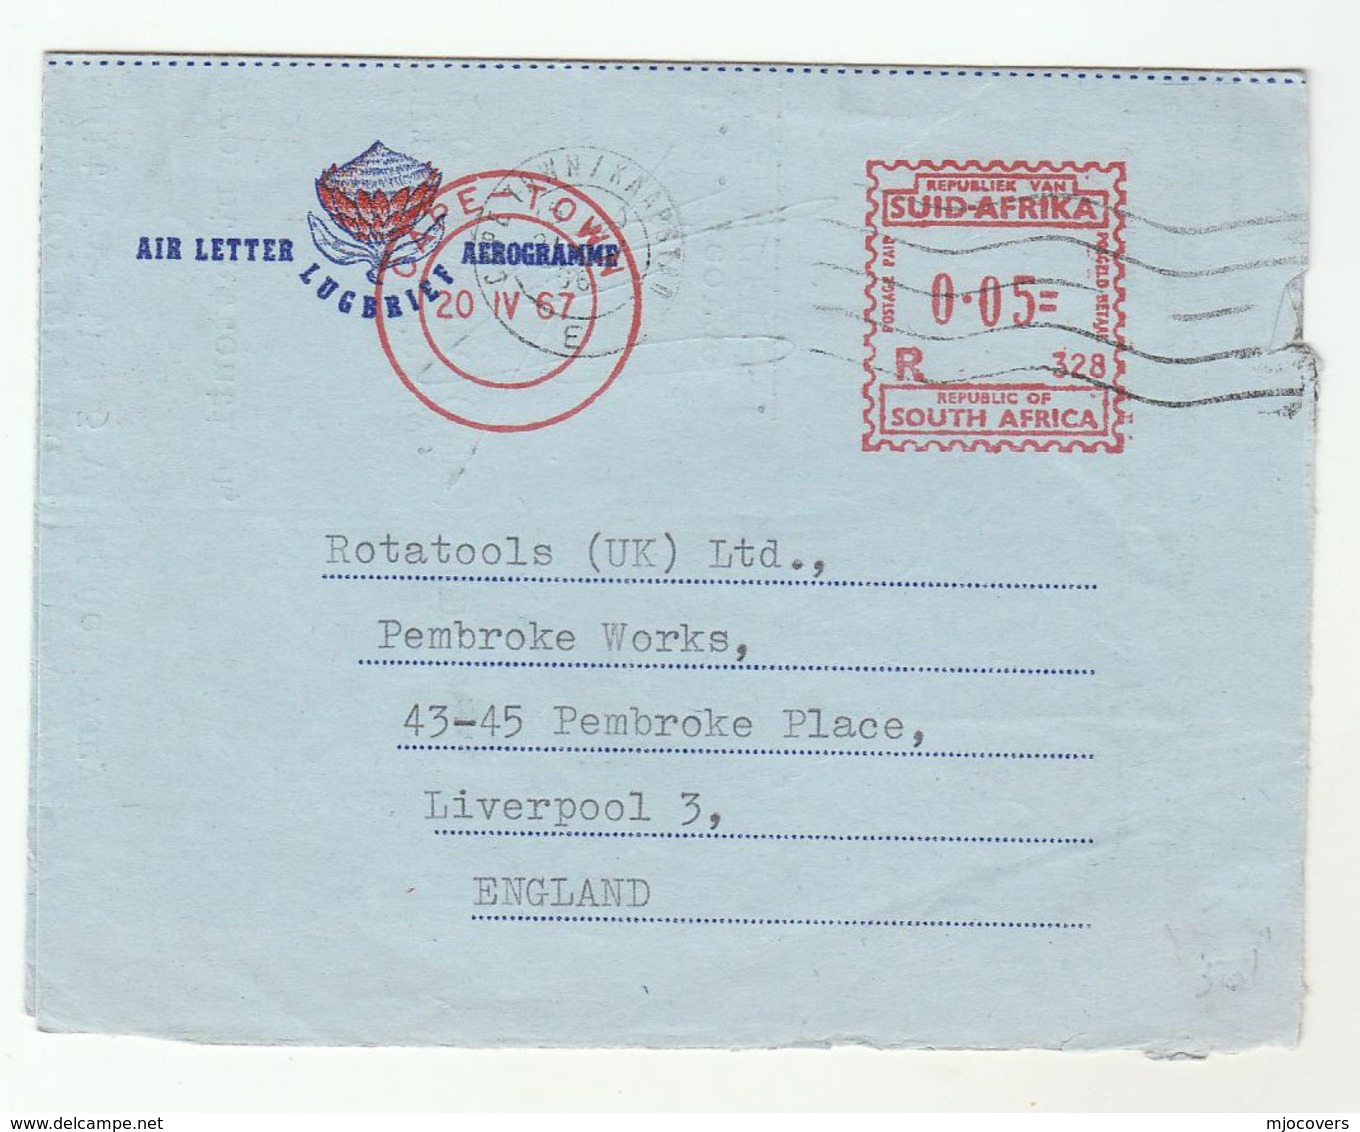 1967 South Africa AEROGRAMME 0.05 R328 METER Stamps Belleville Cape Town To Liverpool GB - Covers & Documents